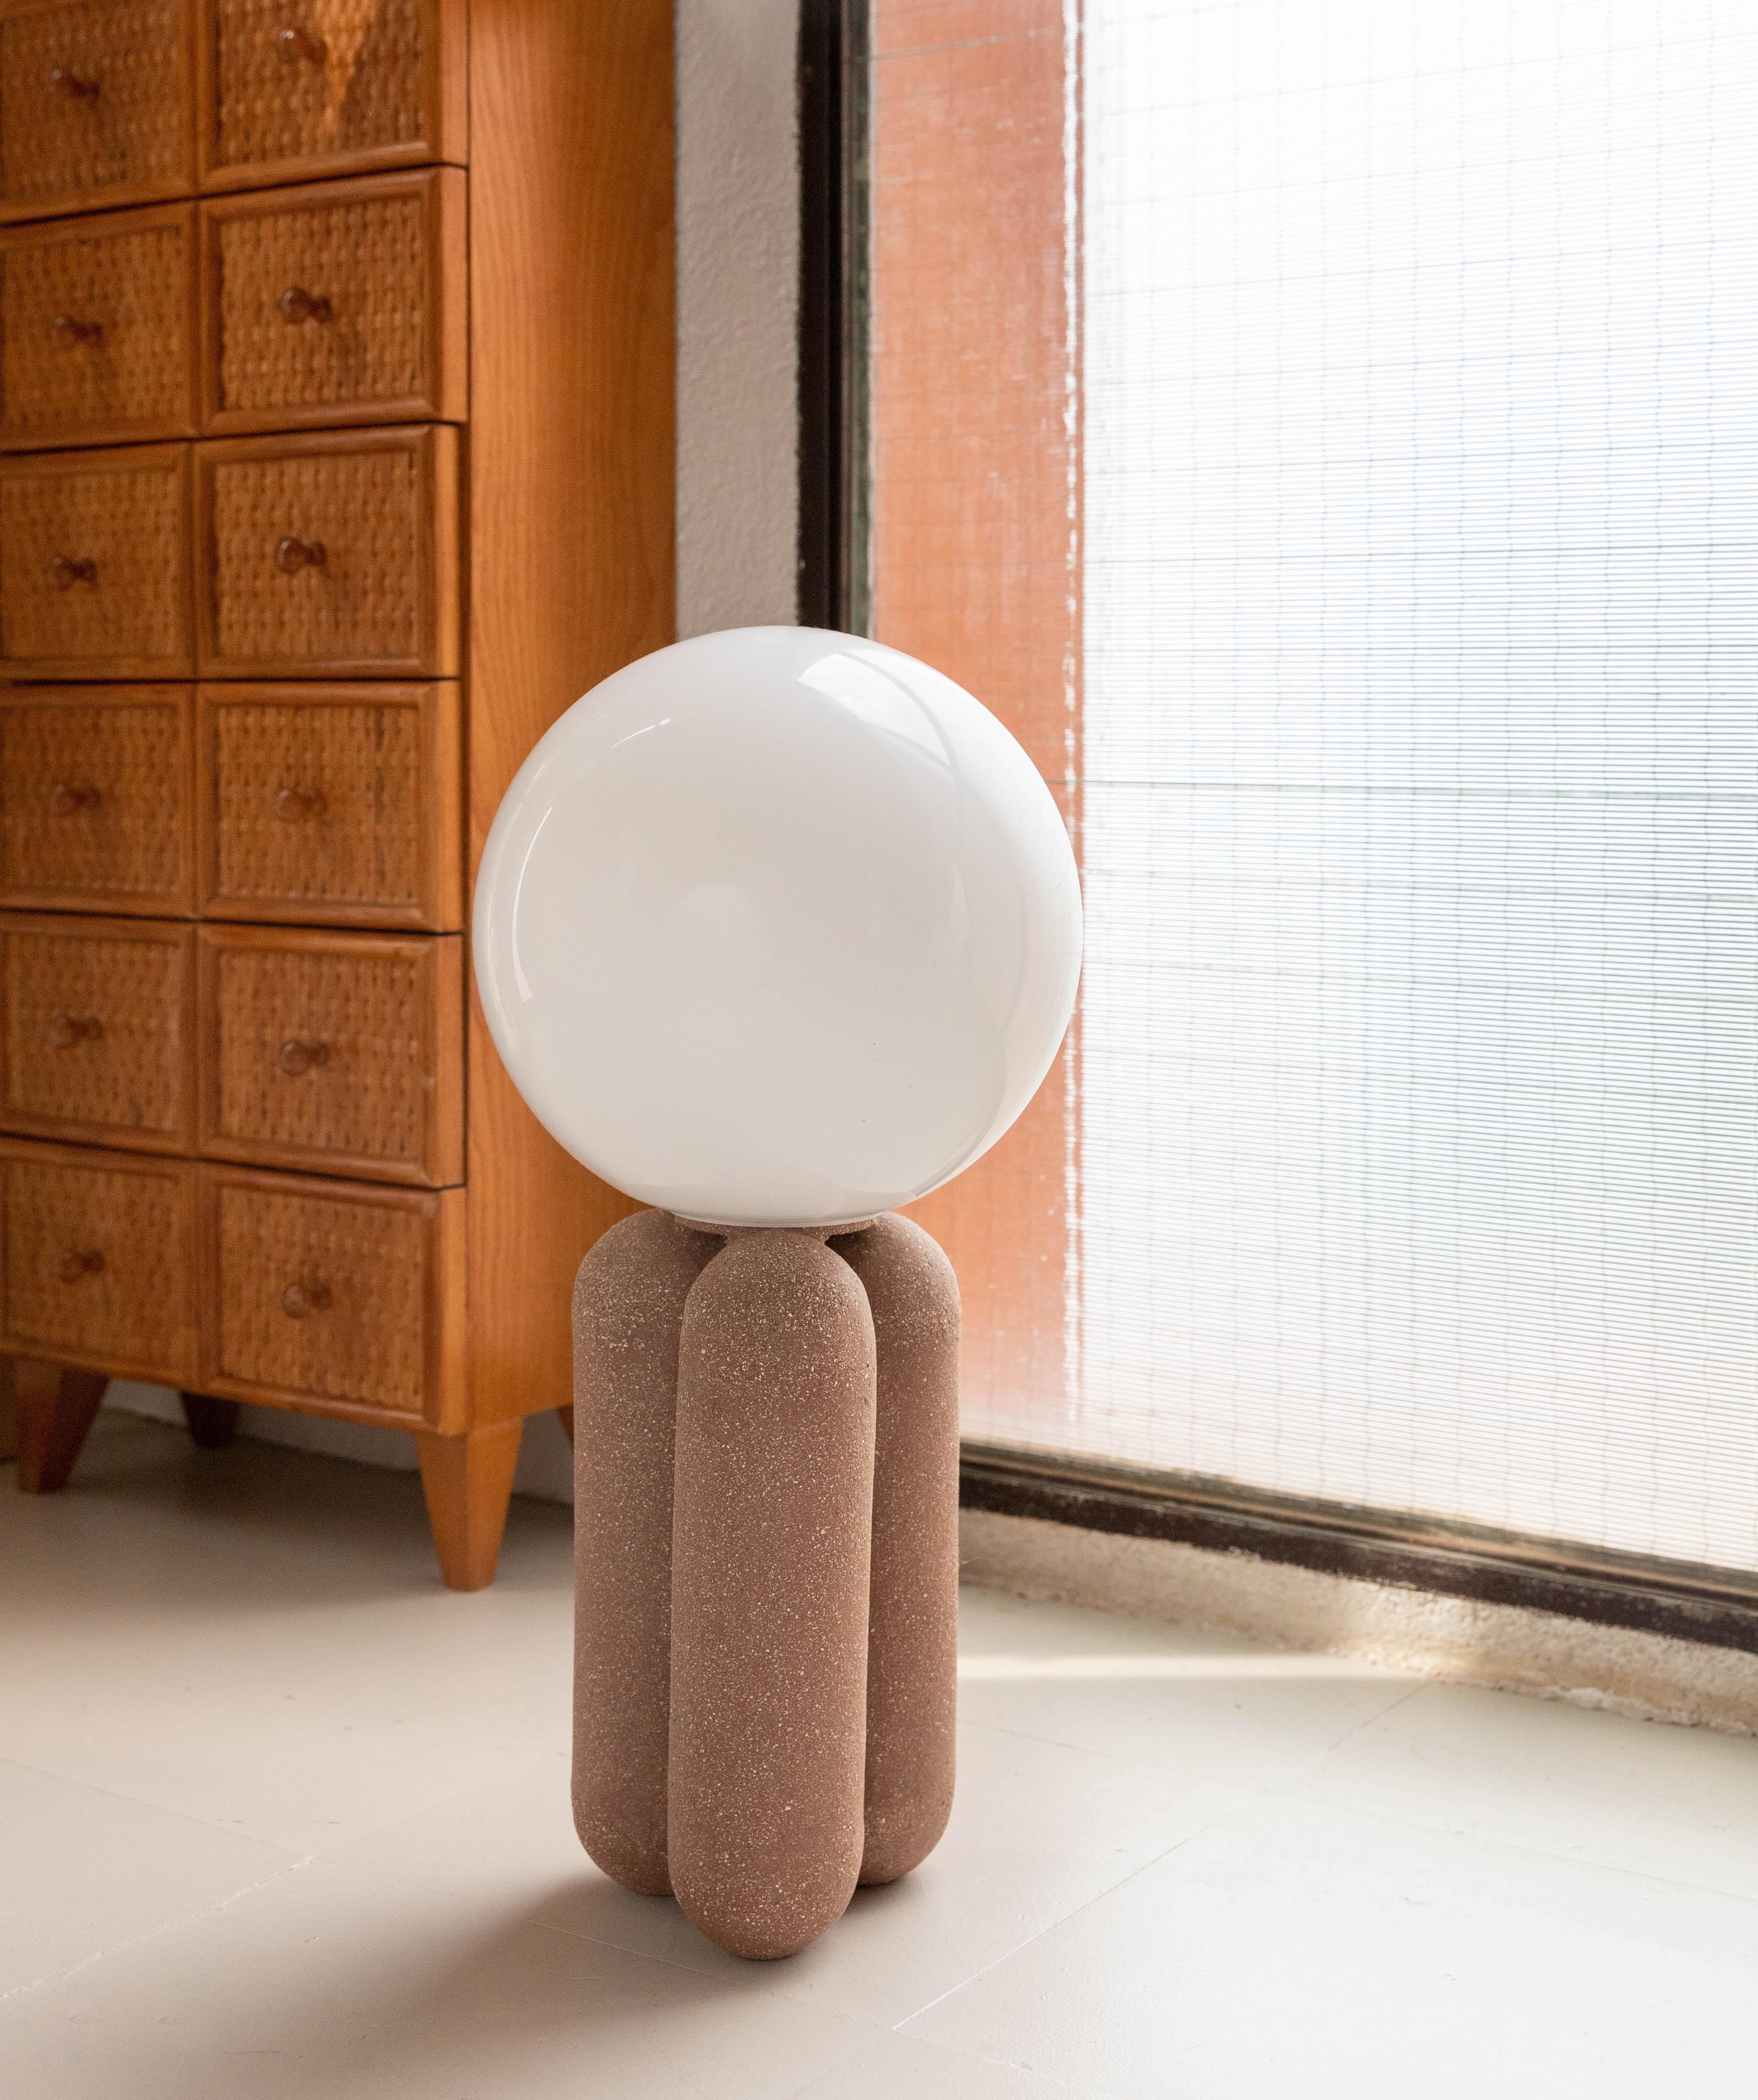 Clay Small Half Sphere Lamp by Lisa Allegra